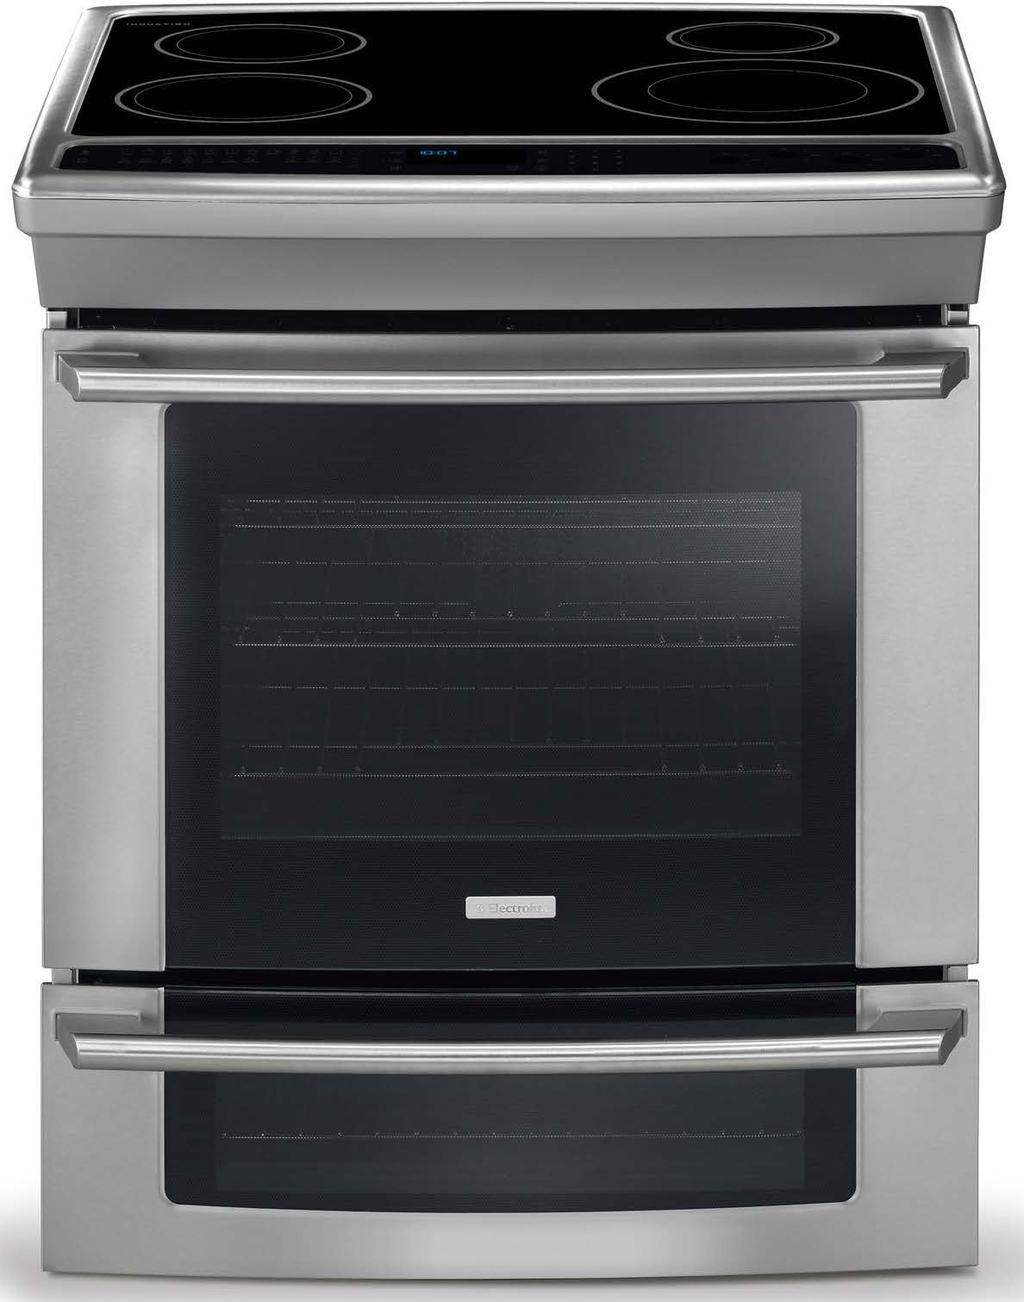 Induction Ranges Whirlpool 49 30 freestanding induction range with convection cooking and warming drawer.